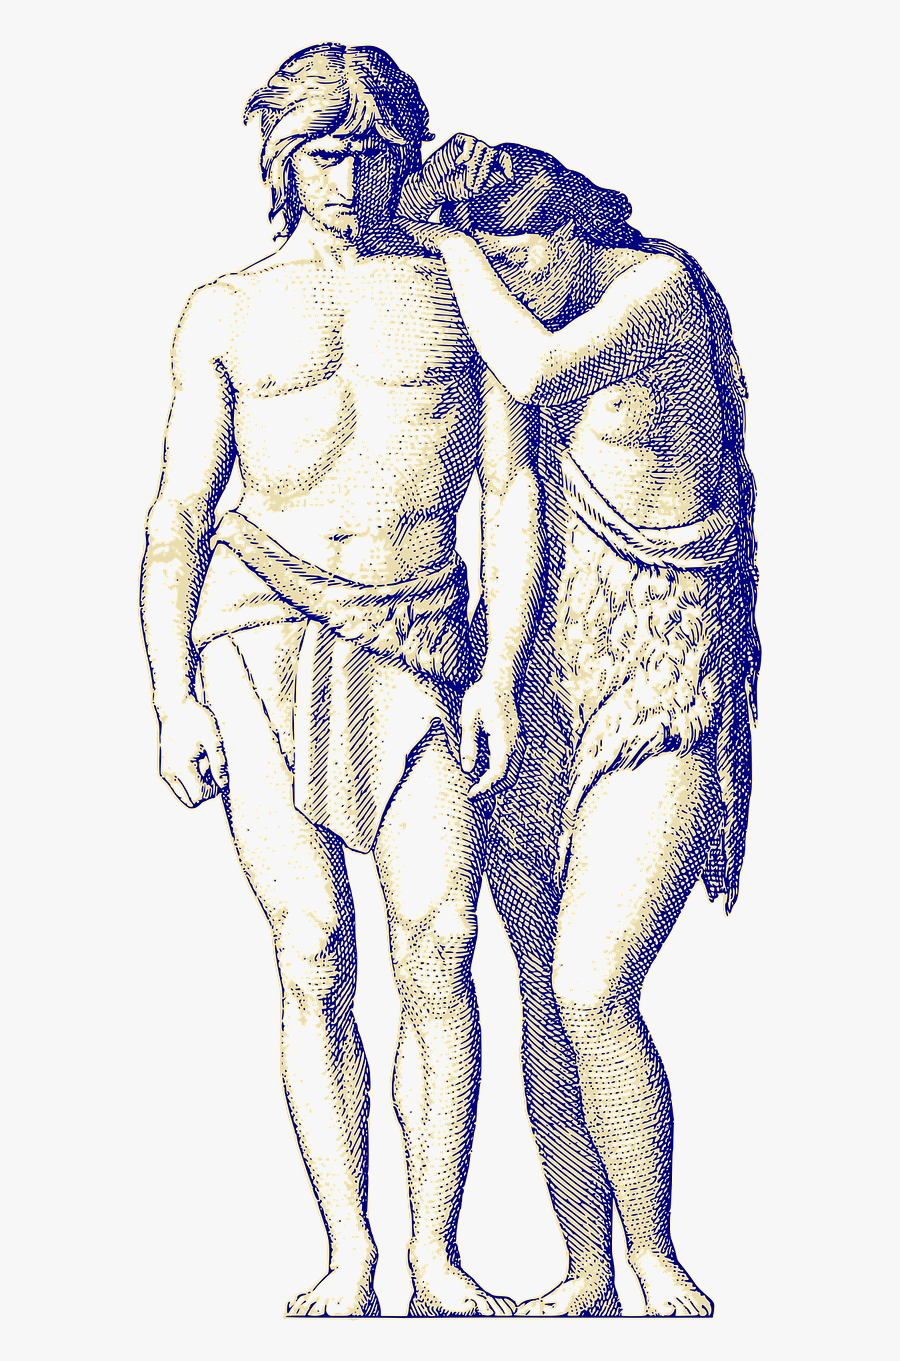 Transparent Clipart Of Adam And Eve - Adam And Eve Png, Transparent Clipart